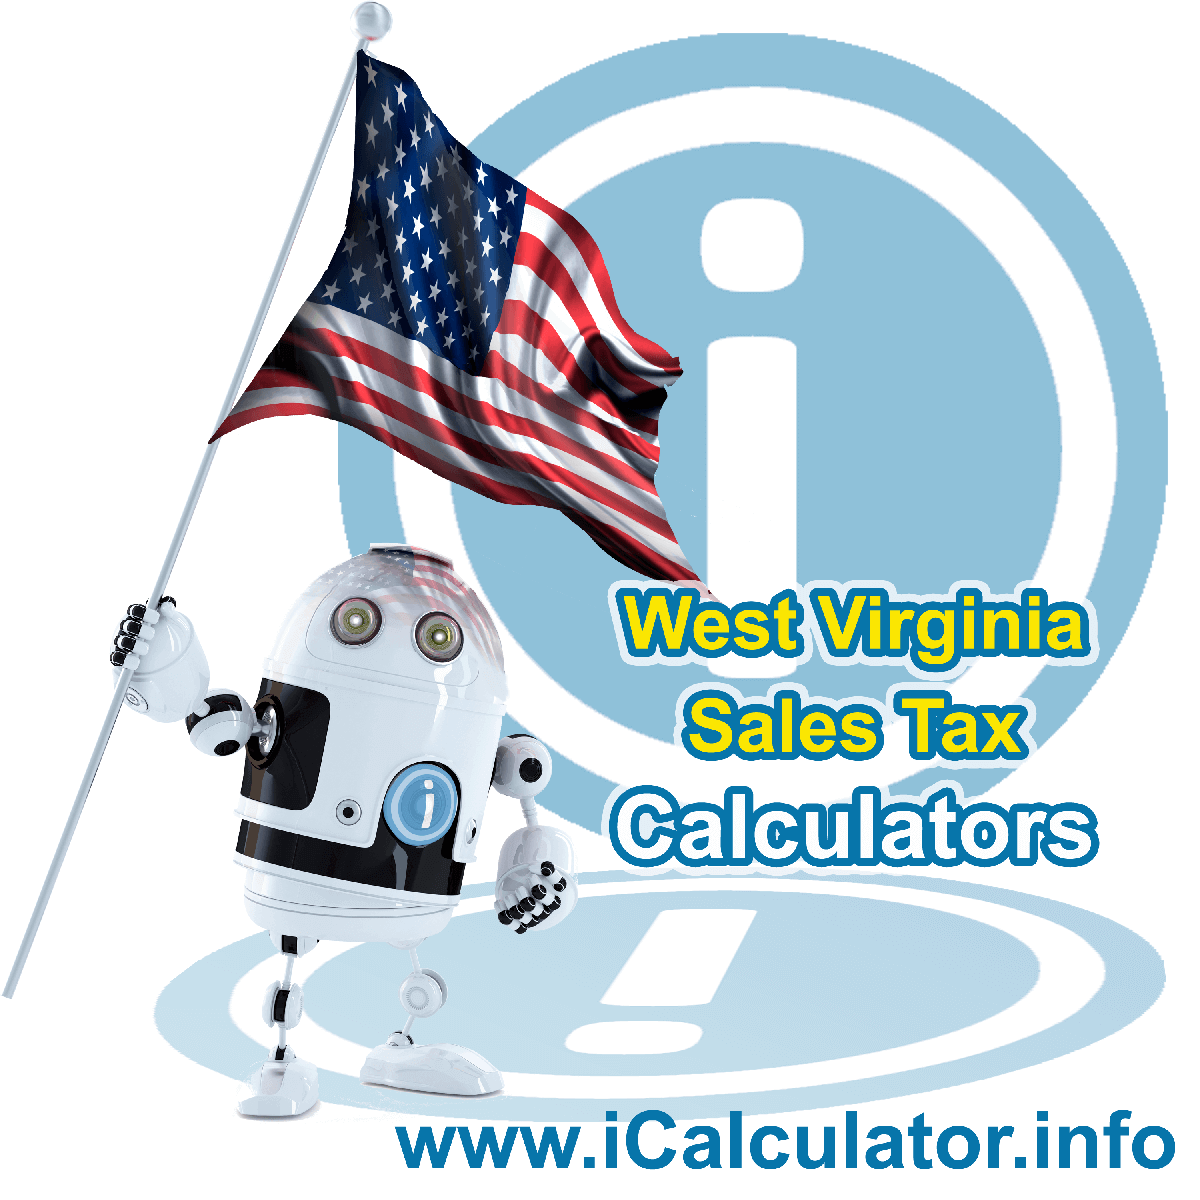 Hedgesville, West Virginia Sales Tax Comparison Calculator: This image illustrates a calculator robot comparing sales tax in Hedgesville, West Virginia manually using the Hedgesville, West Virginia Sales Tax Formula. You can use this information to compare Sales Tax manually or use the Hedgesville, West Virginia Sales Tax Comparison Calculator to calculate and compare Hedgesville, West Virginia sales tax online.